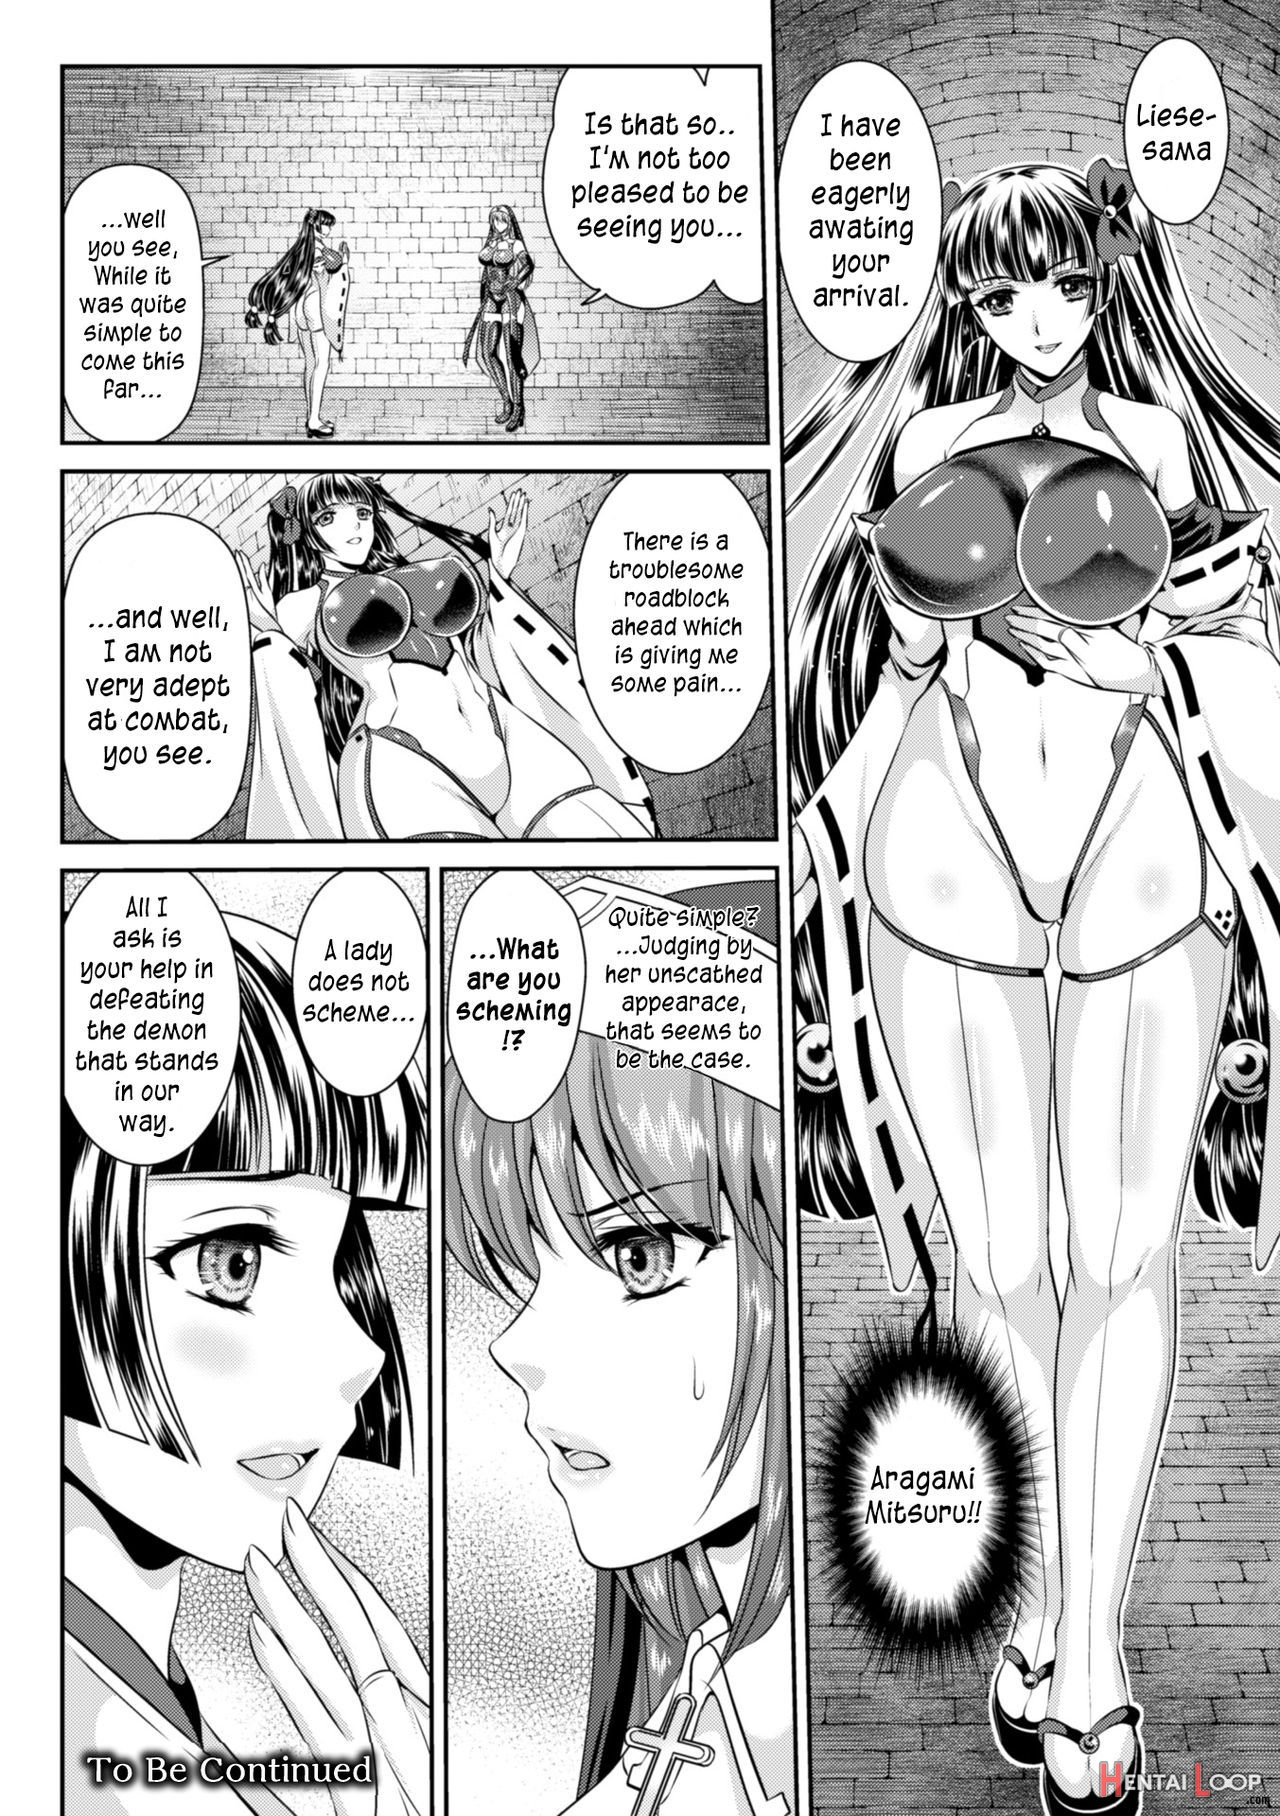 Lieseâ€™s Destiny: Punishment Of Lust On The Slime Prison Ch. 1-4 page 77